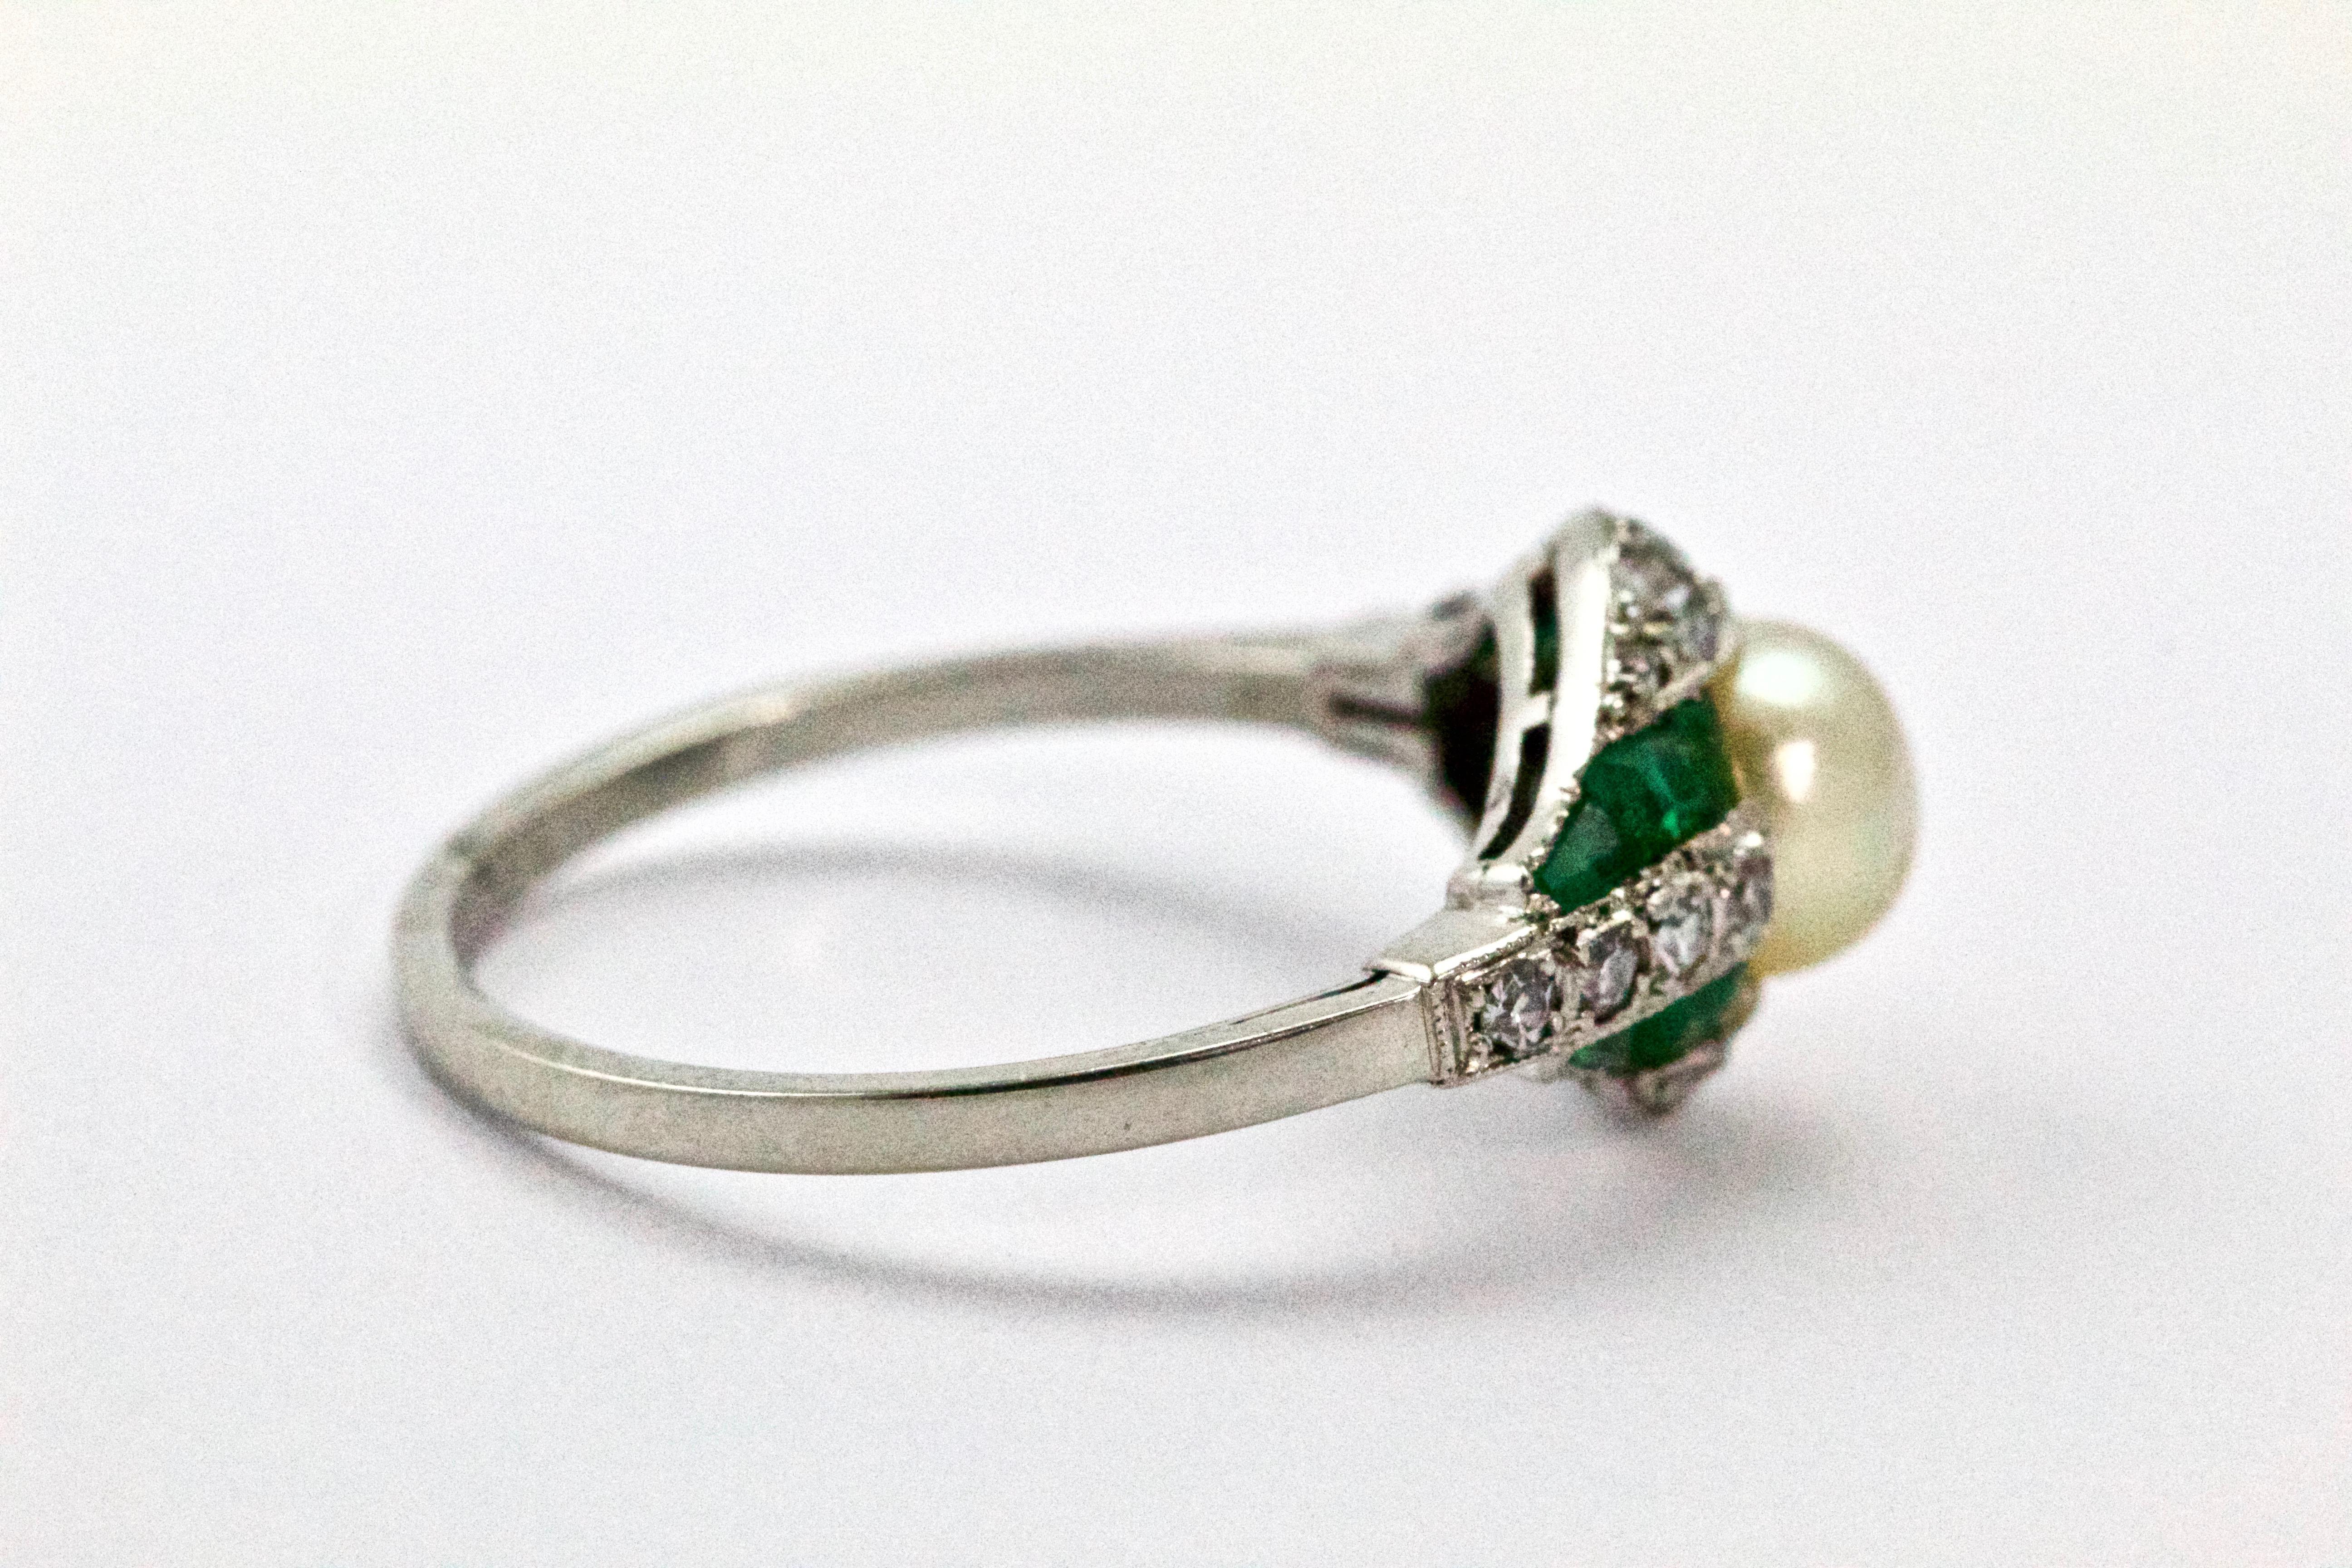 This magnificent Belle Époque ring has a central natural saltwater pearl, ever so slightly off-round with a lovely warm white body color with slight rose overtone it displays wonderful lustre and surface quality, accented with calibre cut emeralds,